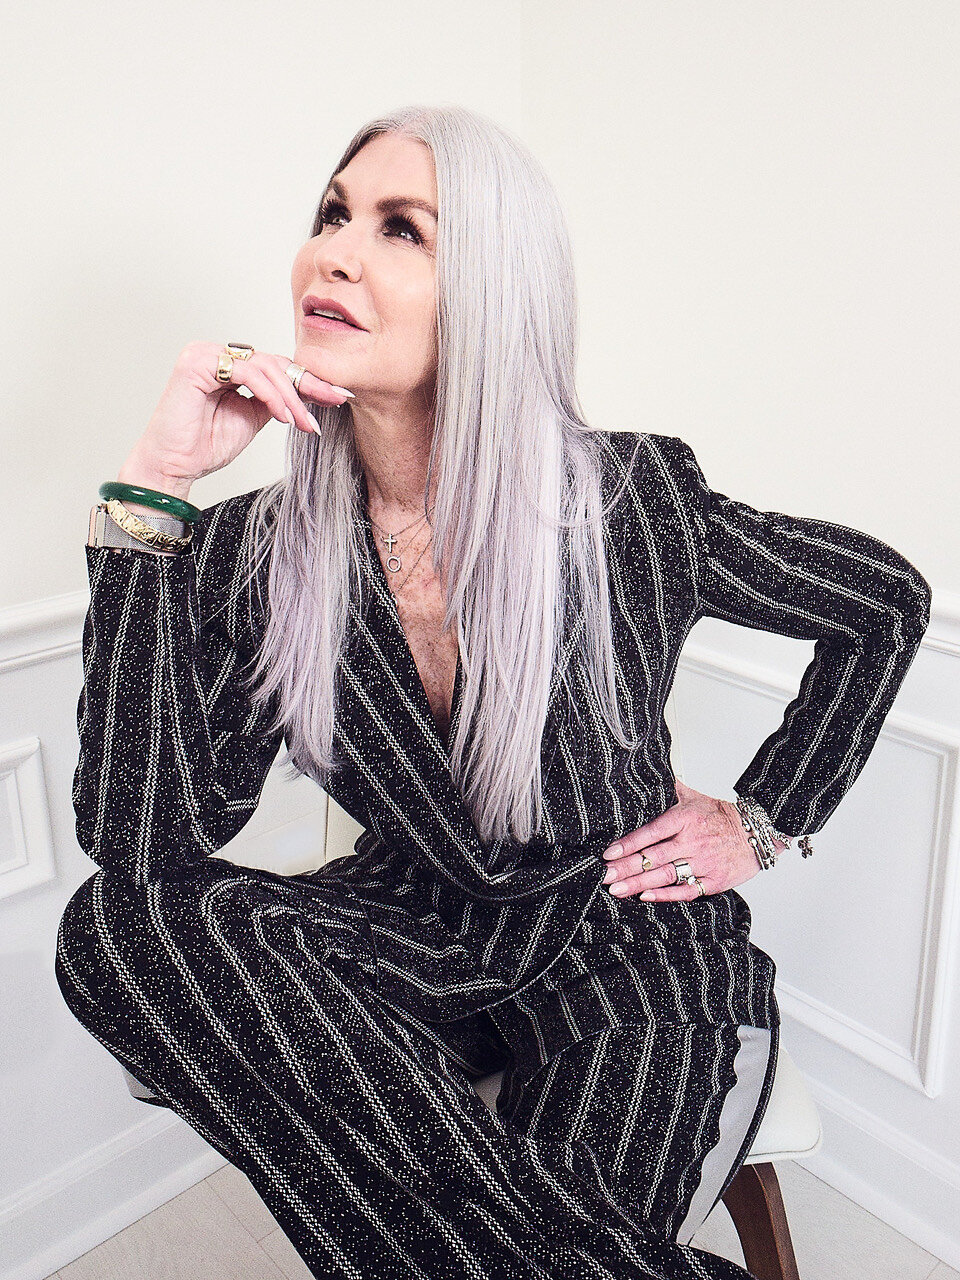 lisa in a pinstripe suit by norma komali